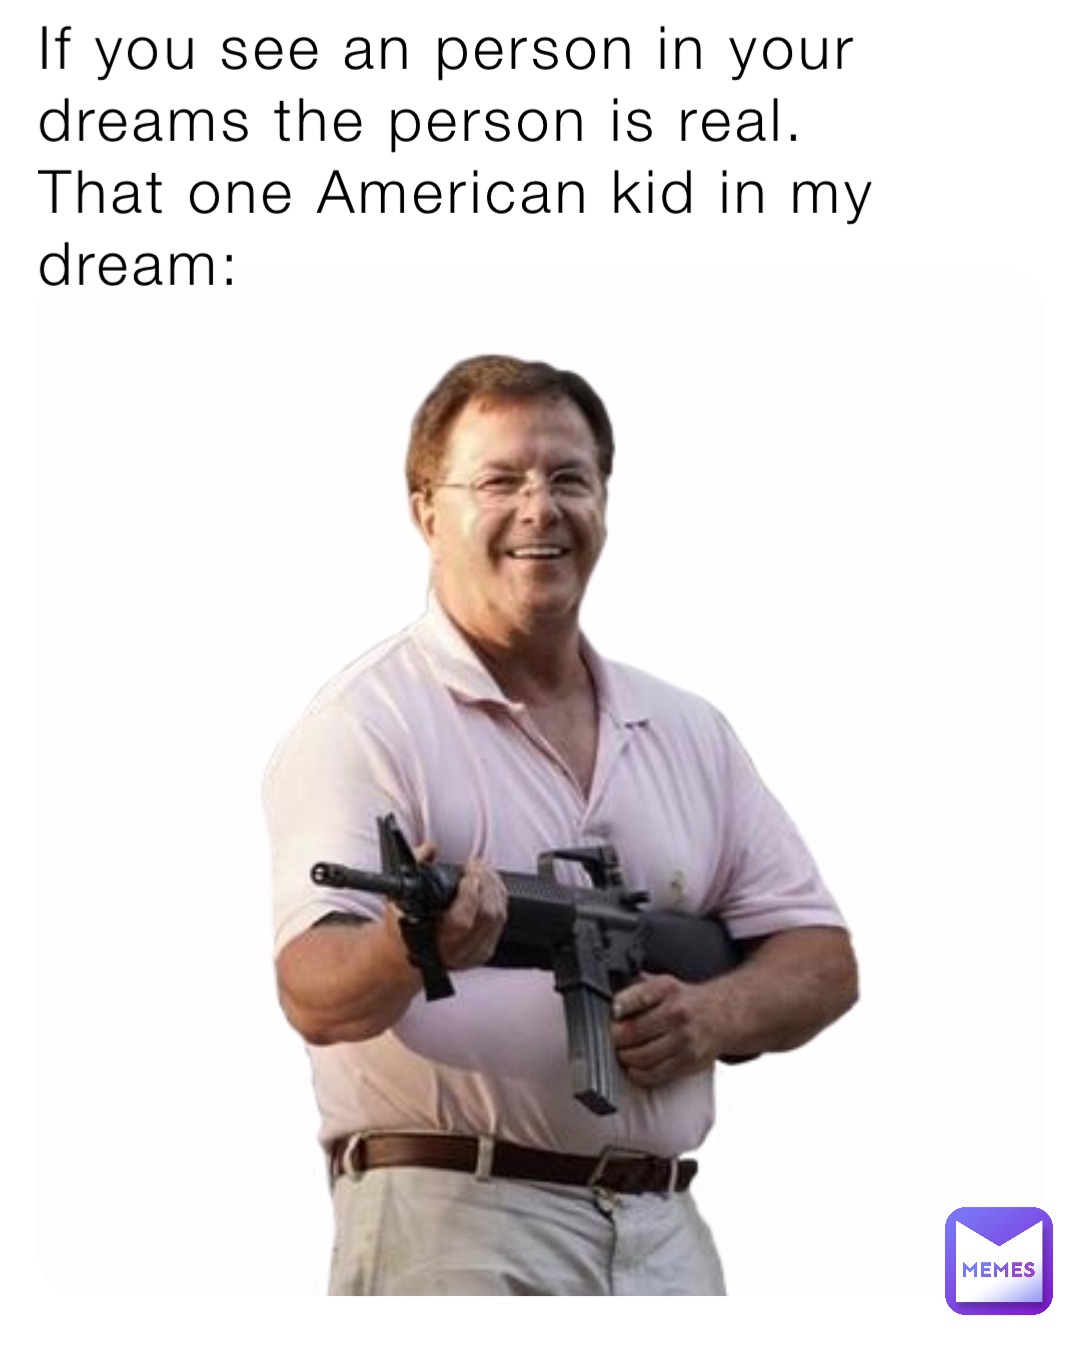 If you see an person in your dreams the person is real.
That one American kid in my dream: